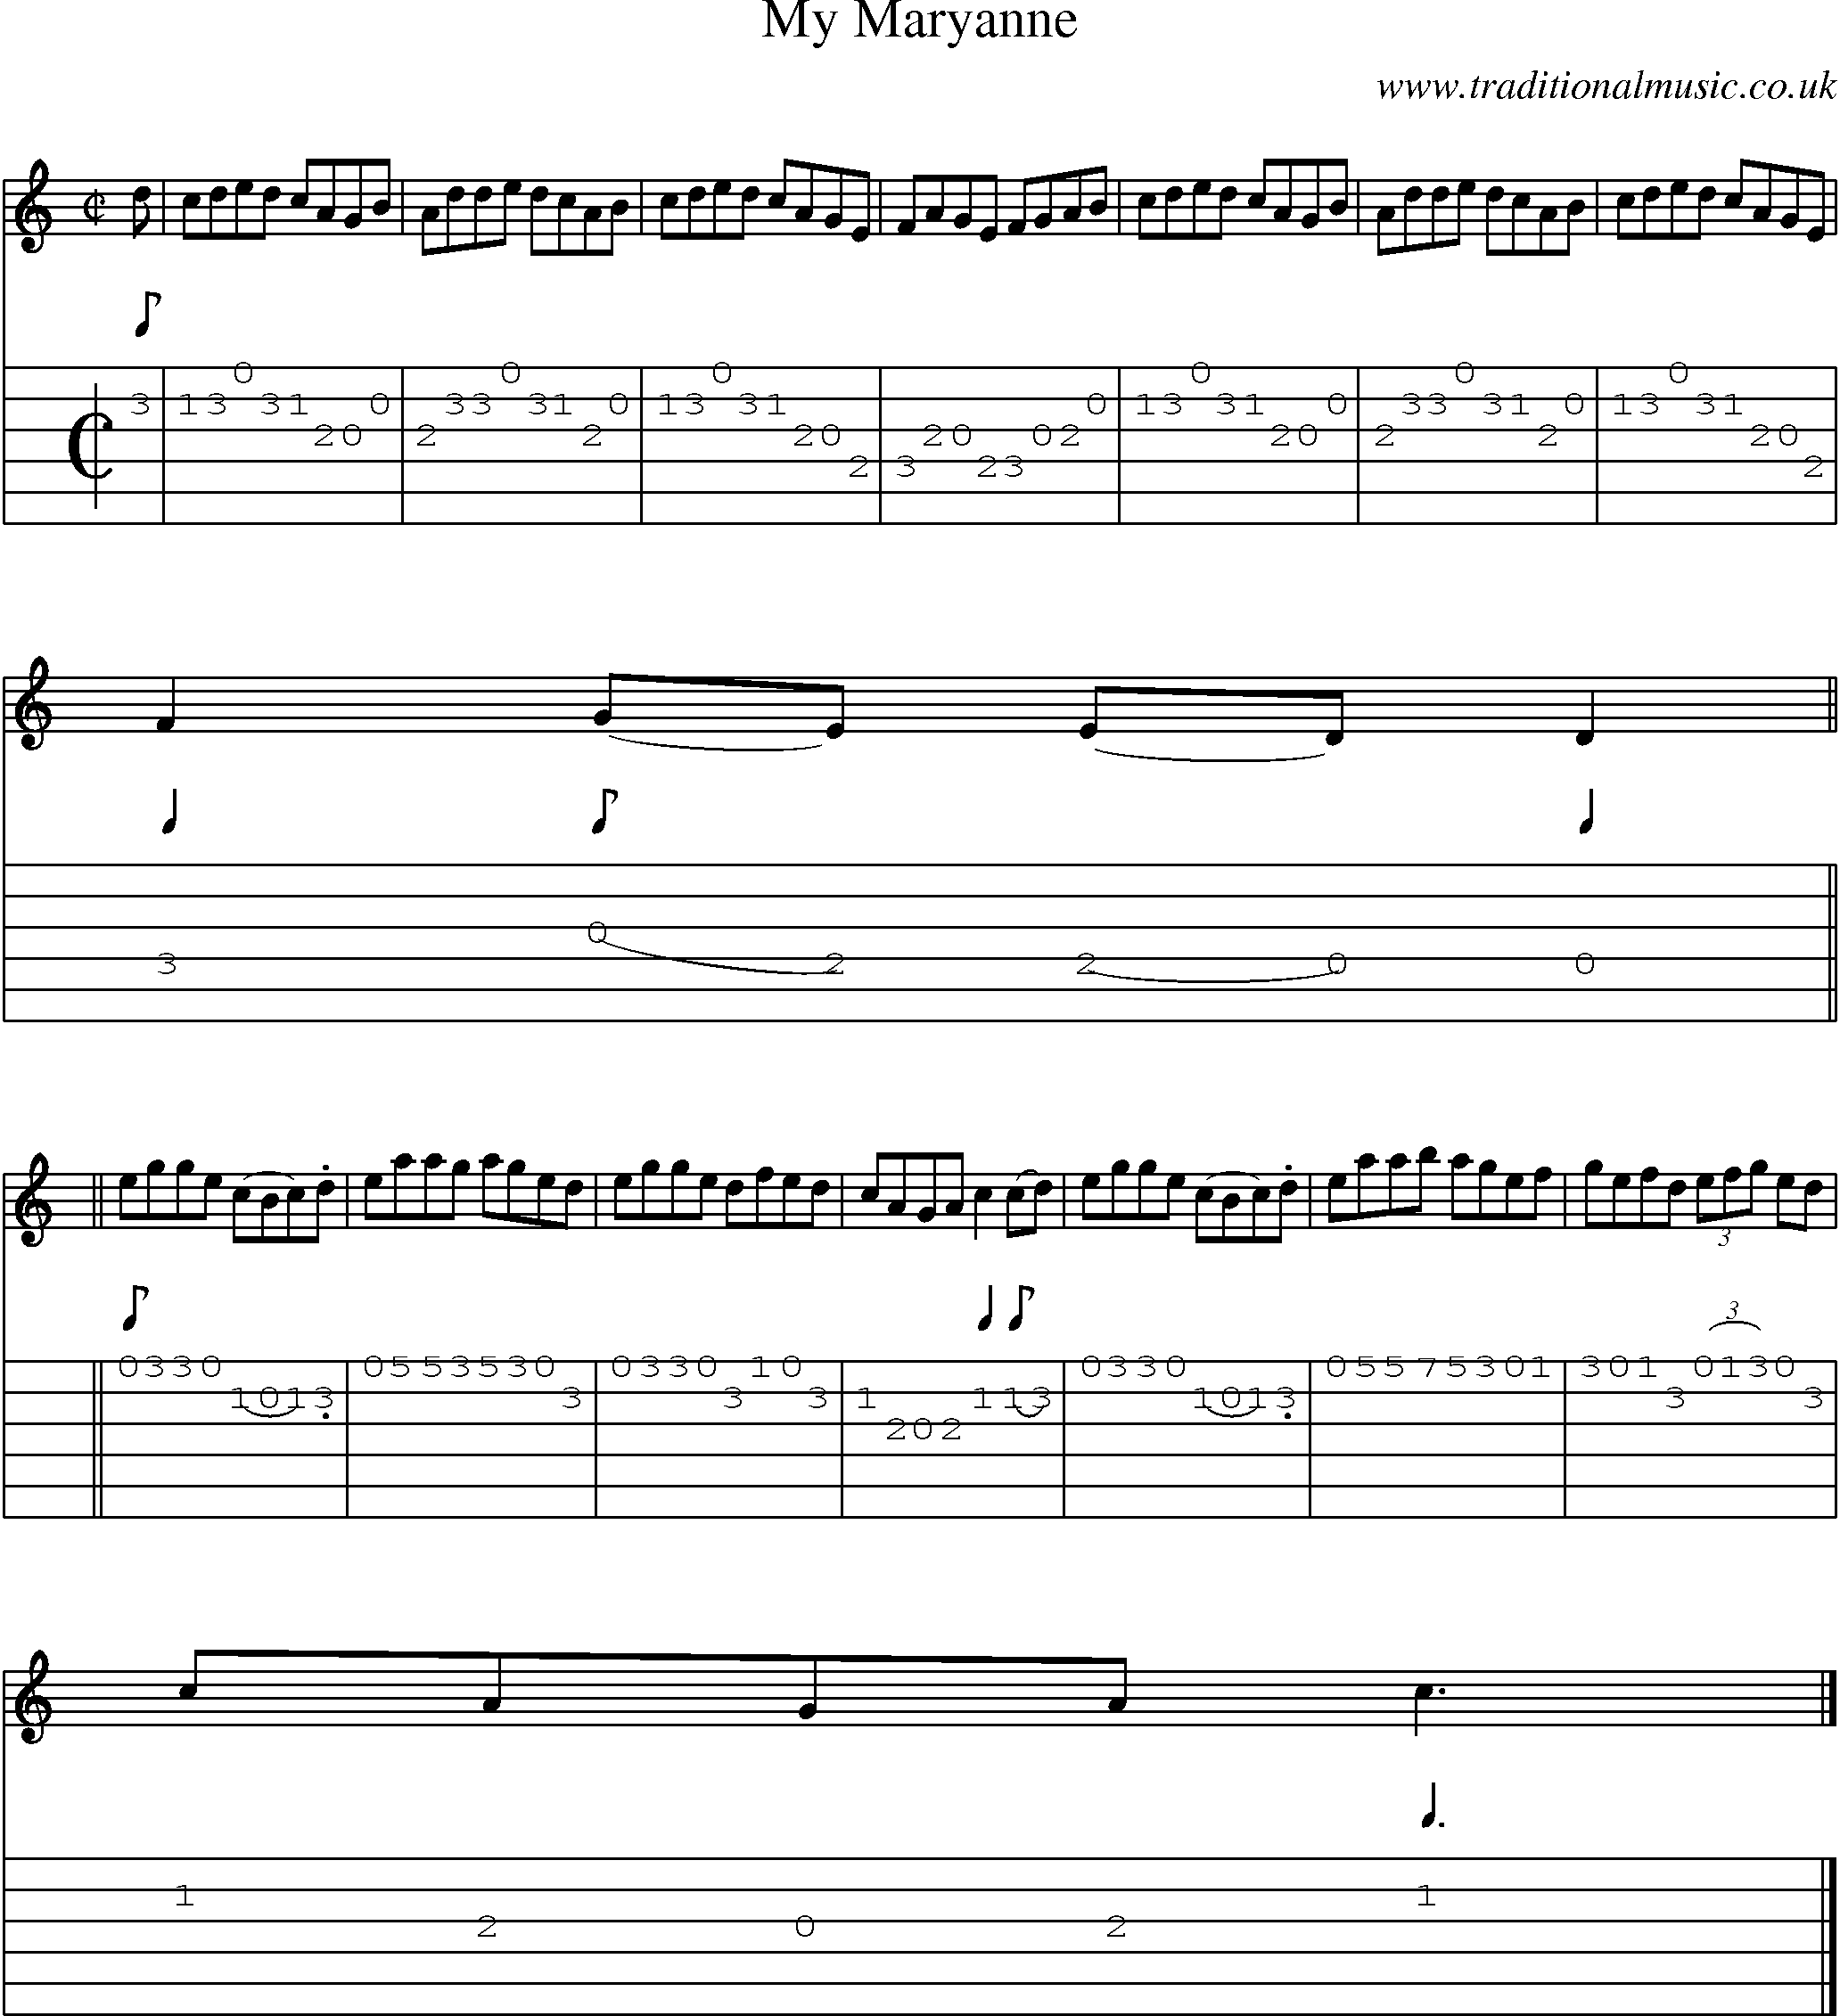 Music Score and Guitar Tabs for My Maryanne